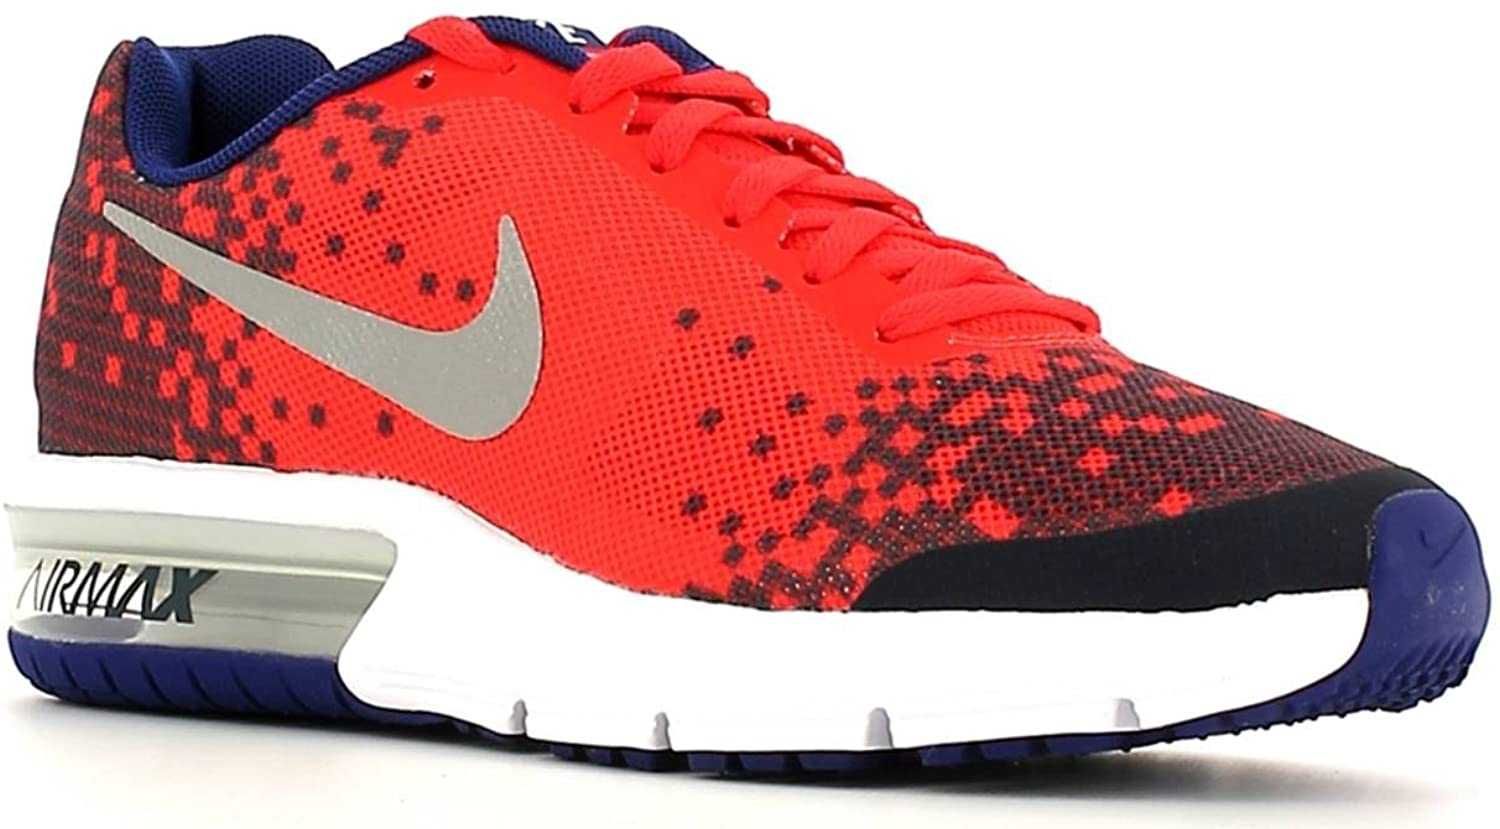 Buty sneakersy  NIKE AIR MAX Sequent 37,5 EU 23,5 CM